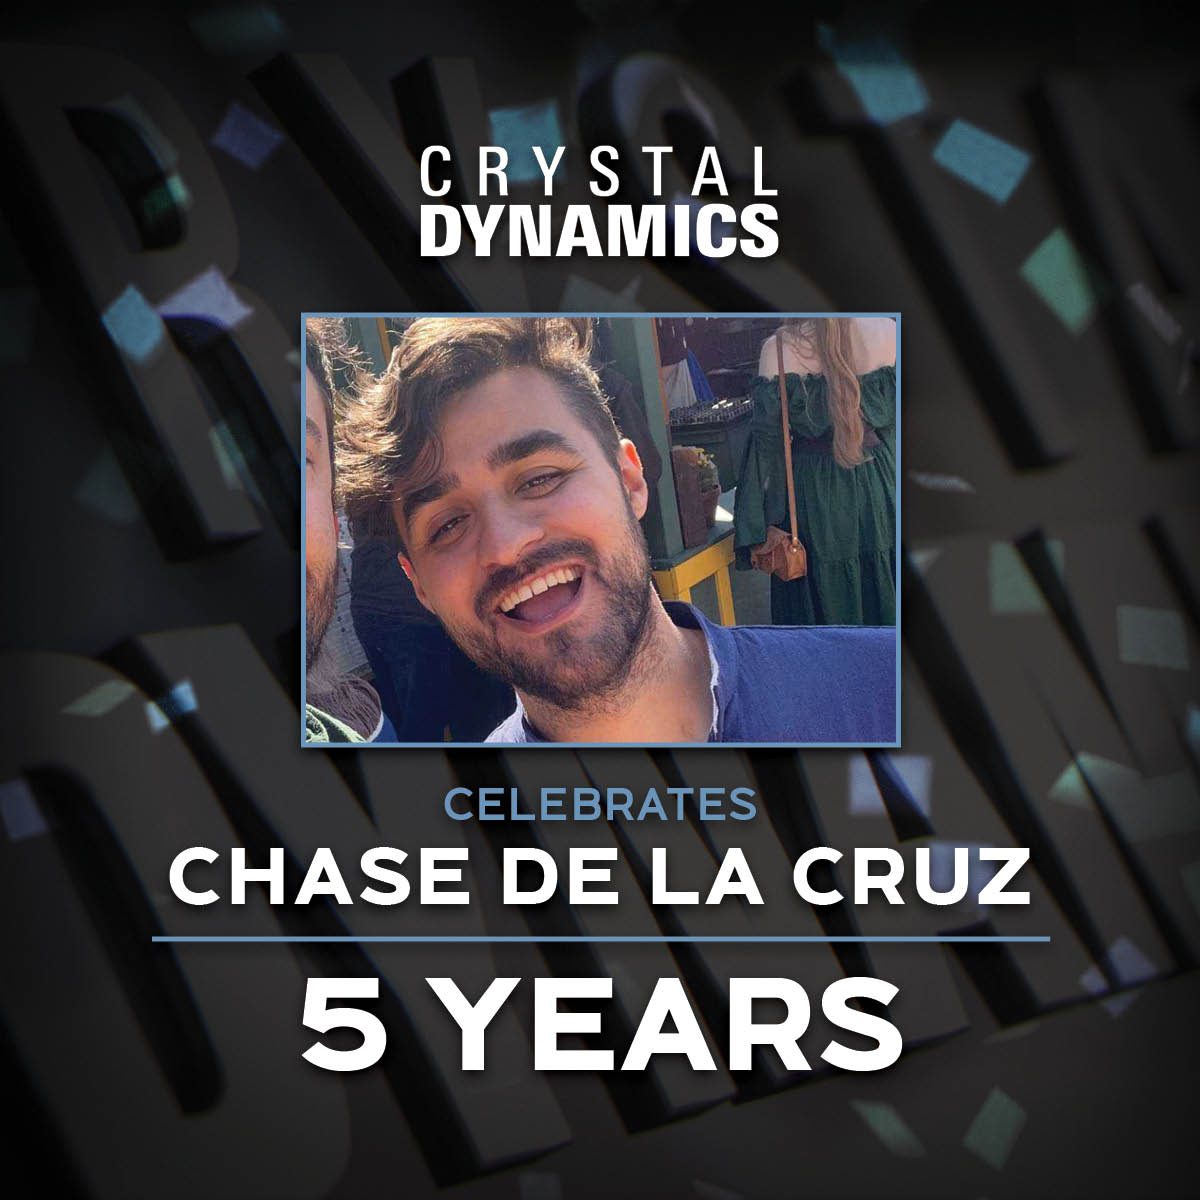 🥳 Designer III Chase De La Cruz celebrates 5 YEARS at Crystal Dynamics today! 🎮 Like many of us, Chase's current gaming obsession is Baldur's Gate 3, in which he's currently on his third campaign! 🤯 #gamedev #gamedevelopment #gamedeveloper